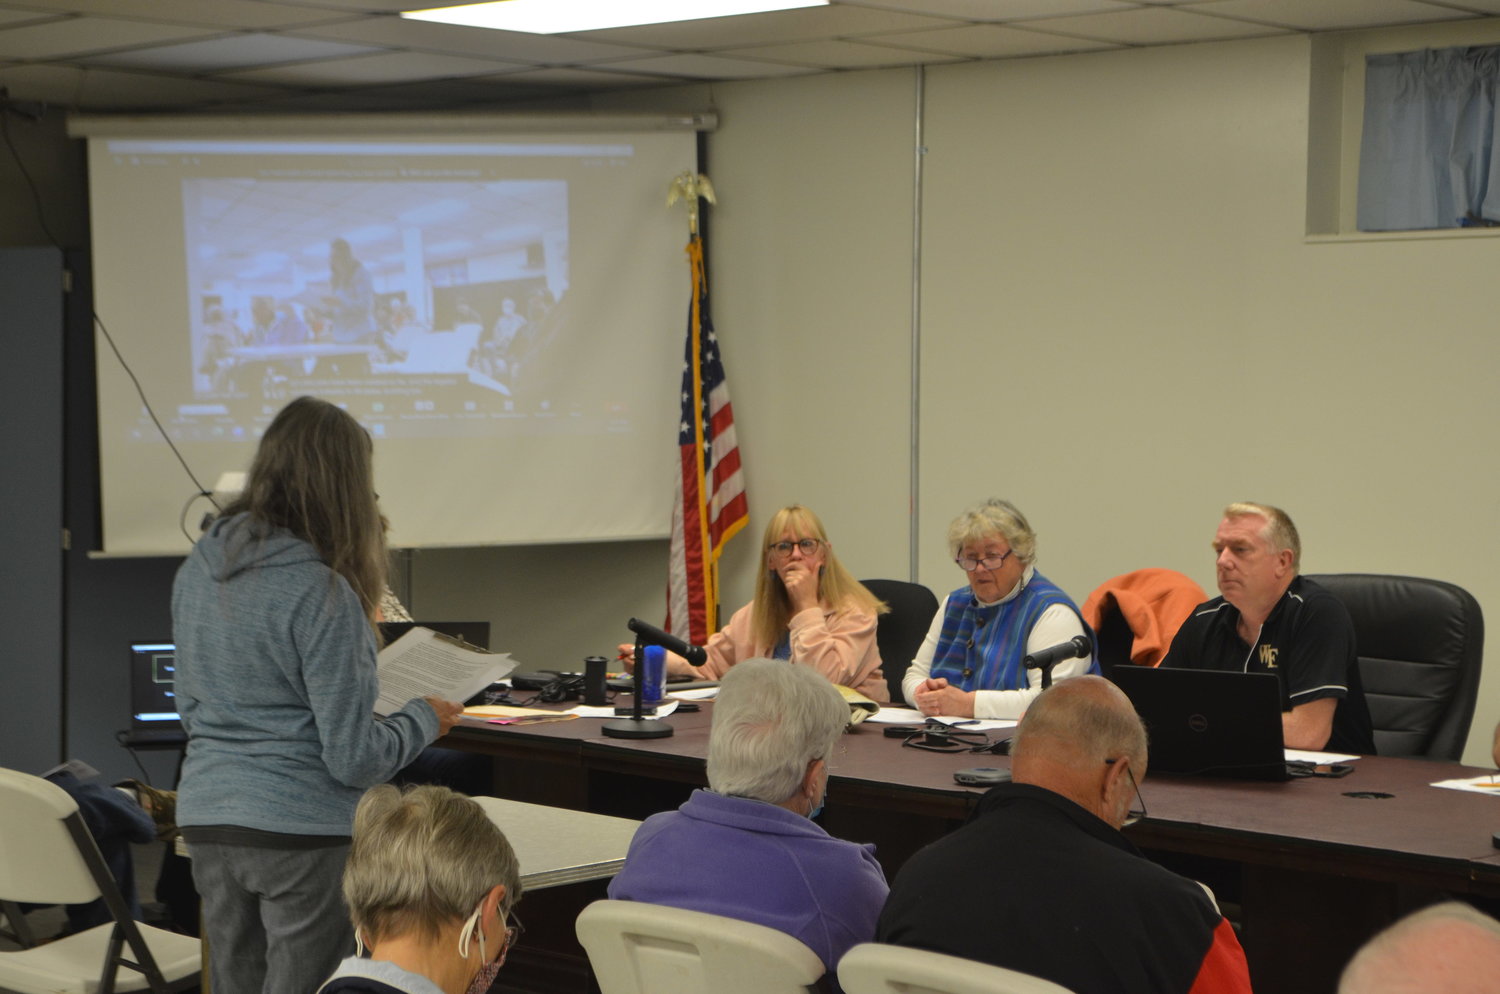 Brandi Merolla, left, speaking before the Tusten town board at its October public hearing.